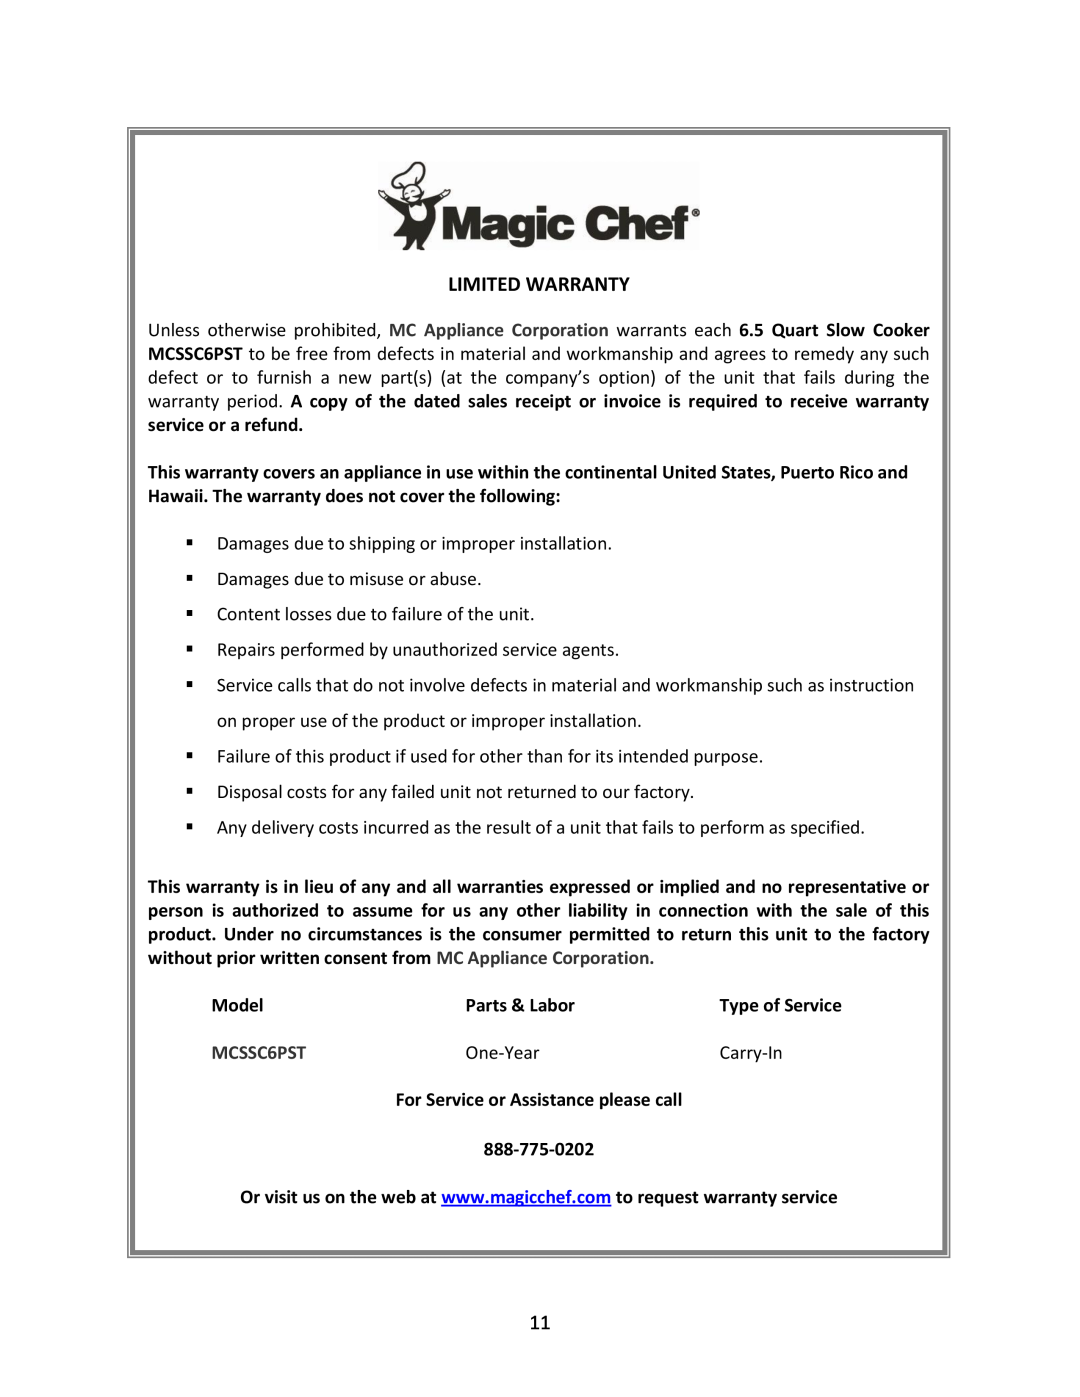 Magic Chef MCSSC6PST instruction manual Limited Warranty, Model, Parts & Labor, One-Year, Carry-In 